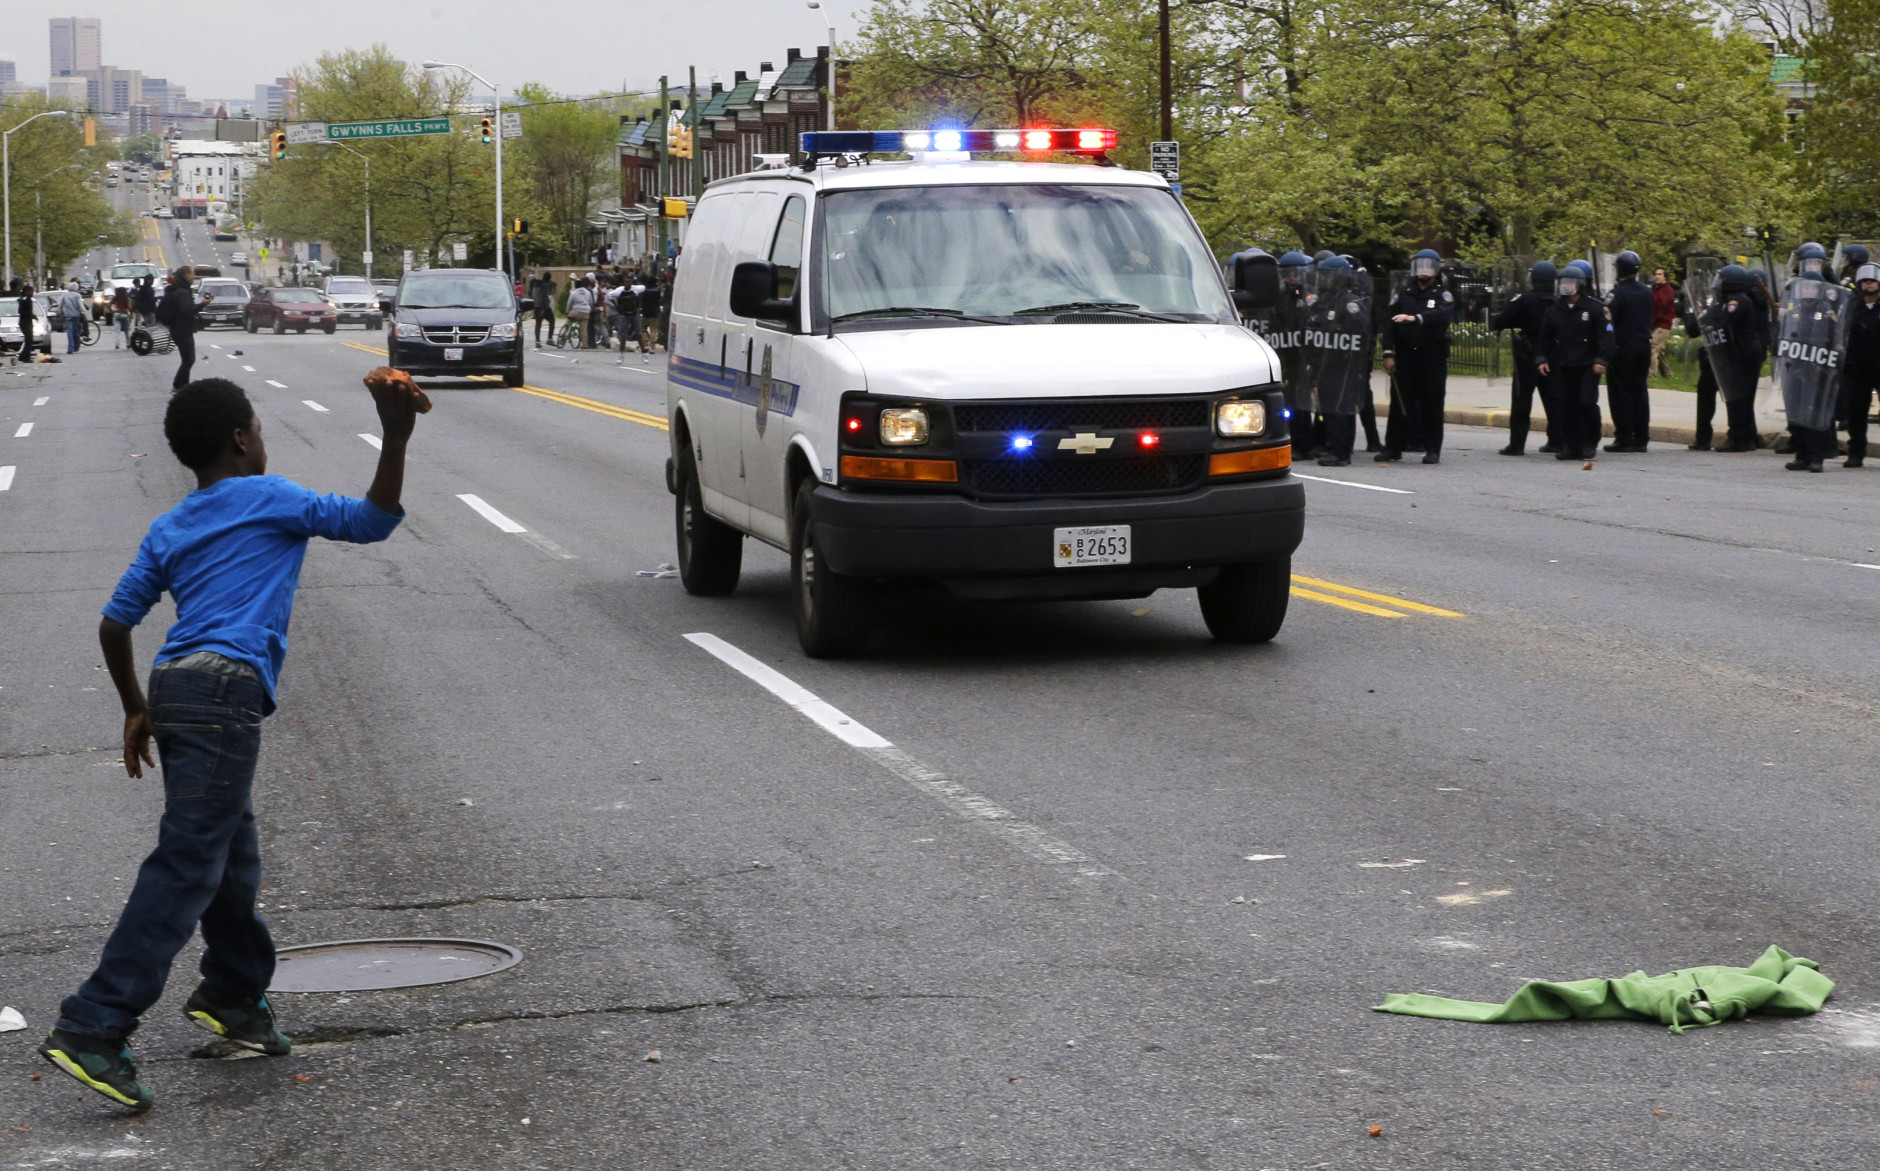 A boy throws a brick at a police van, Monday, April 27, 2015, during a skirmish between demonstrators and police after the funeral of Freddie Gray in Baltimore. Gray died from spinal injuries about a week after he was arrested and transported in a Baltimore Police Department van. (AP Photo/Patrick Semansky)